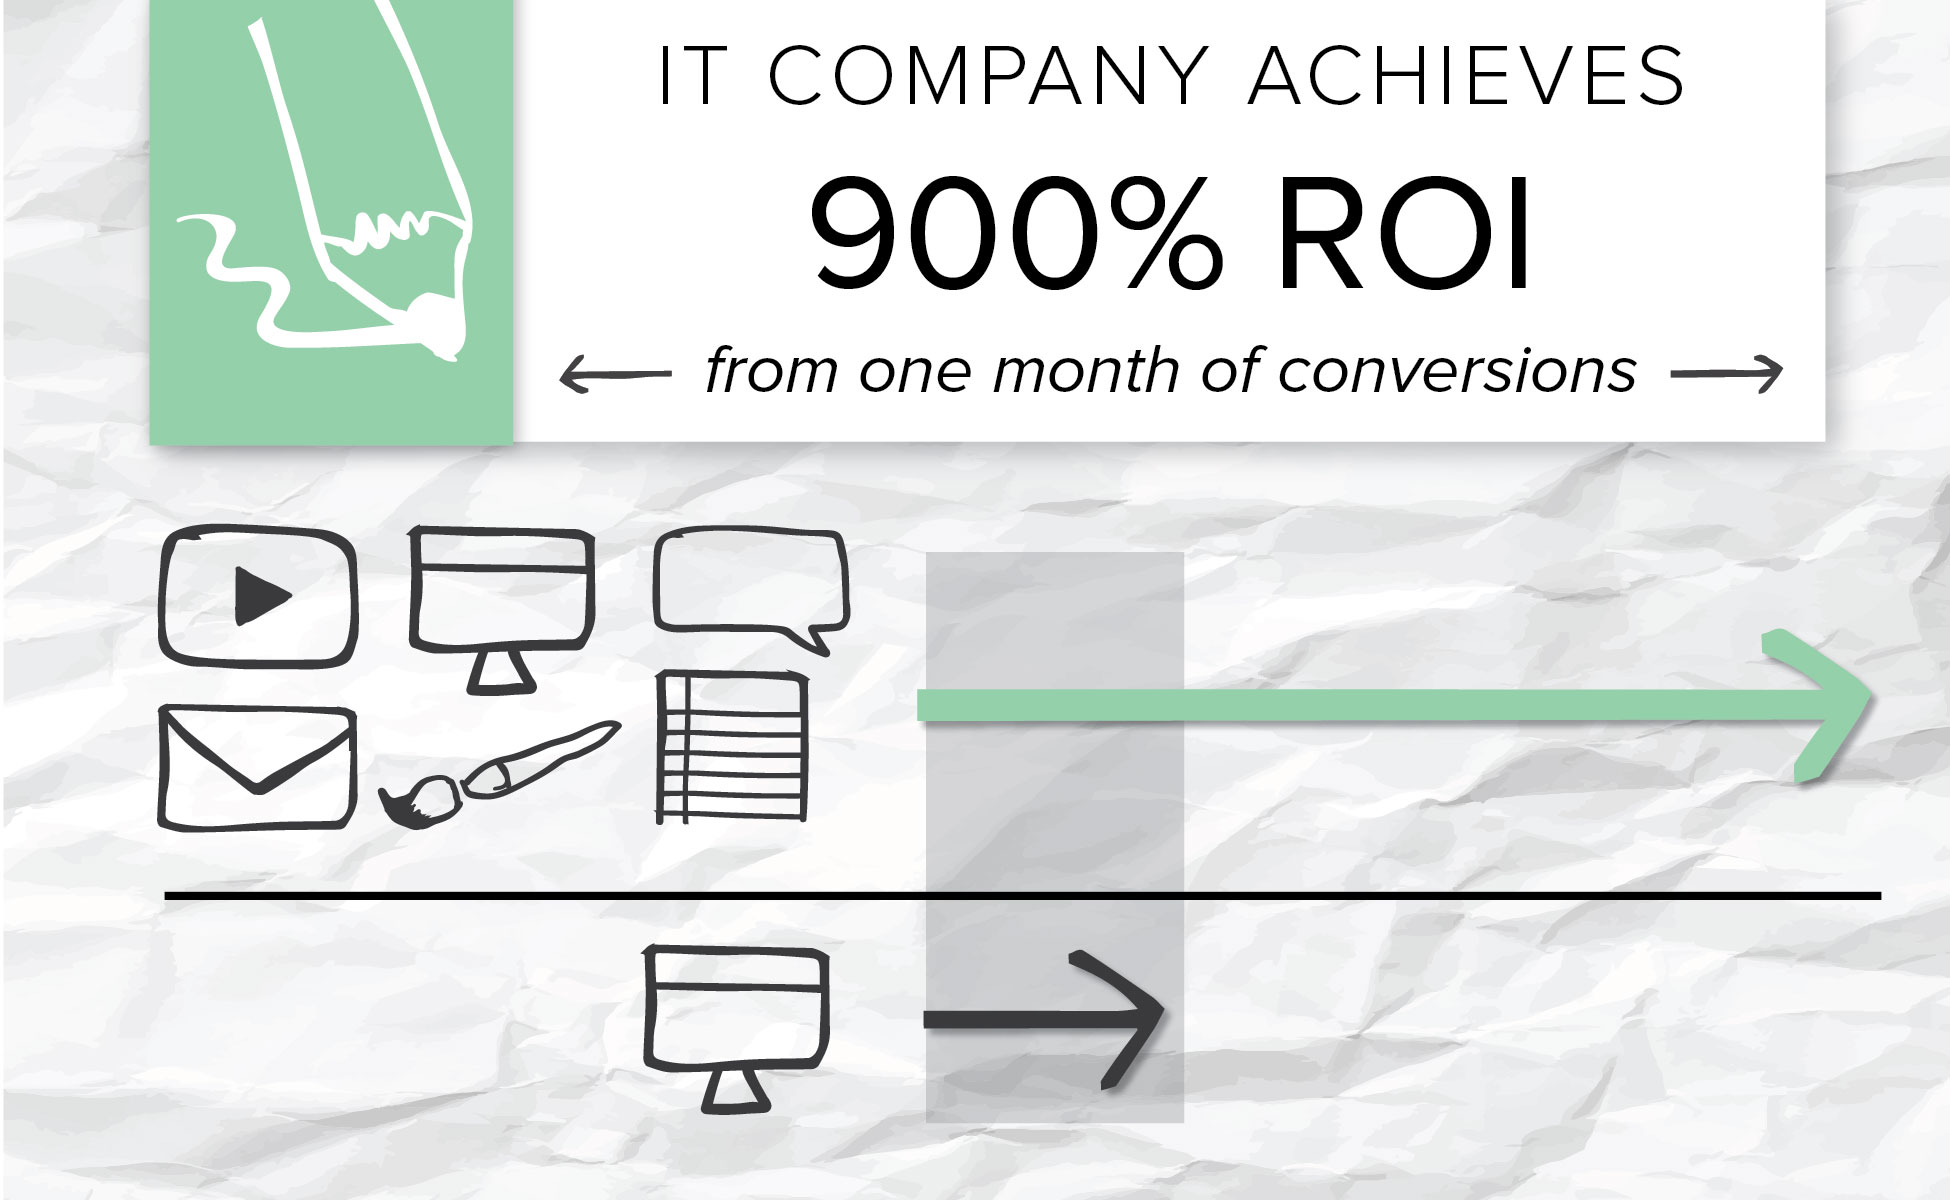 One company created the right mix of content to generate 900 percent ROI.